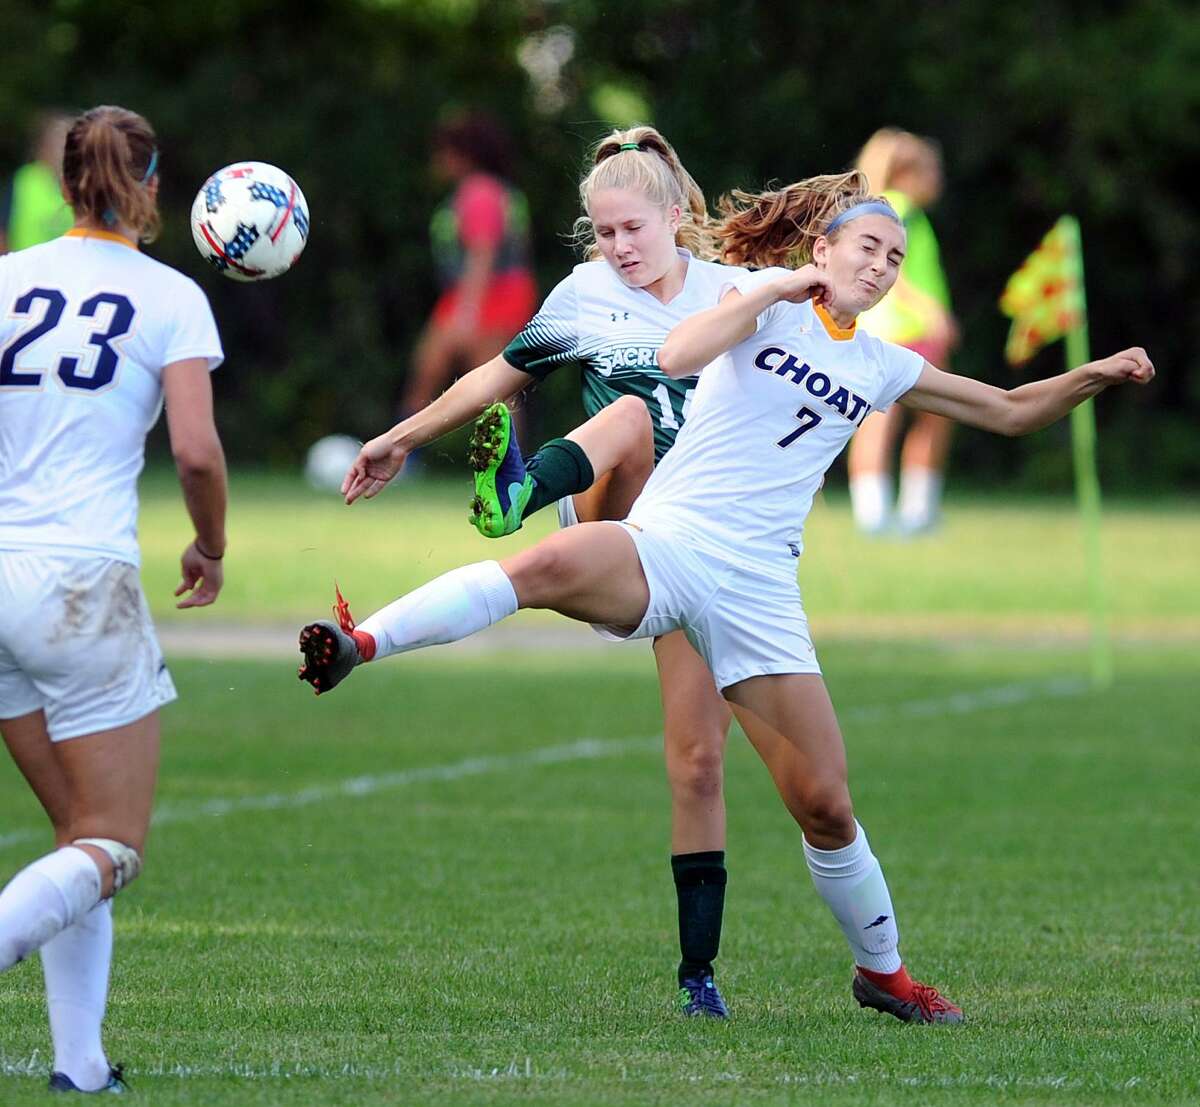 At right, Choate's Julianne Sekula (#7) and Sacred Heart's Hannah Dempsey (#15) vie for a ball in the air during the girls high school soccer match between Sacred Heart Greenwich and Choate Rosemary Hall at Greenwich, Conn., Wednesday, Sept. 19th, 2018.